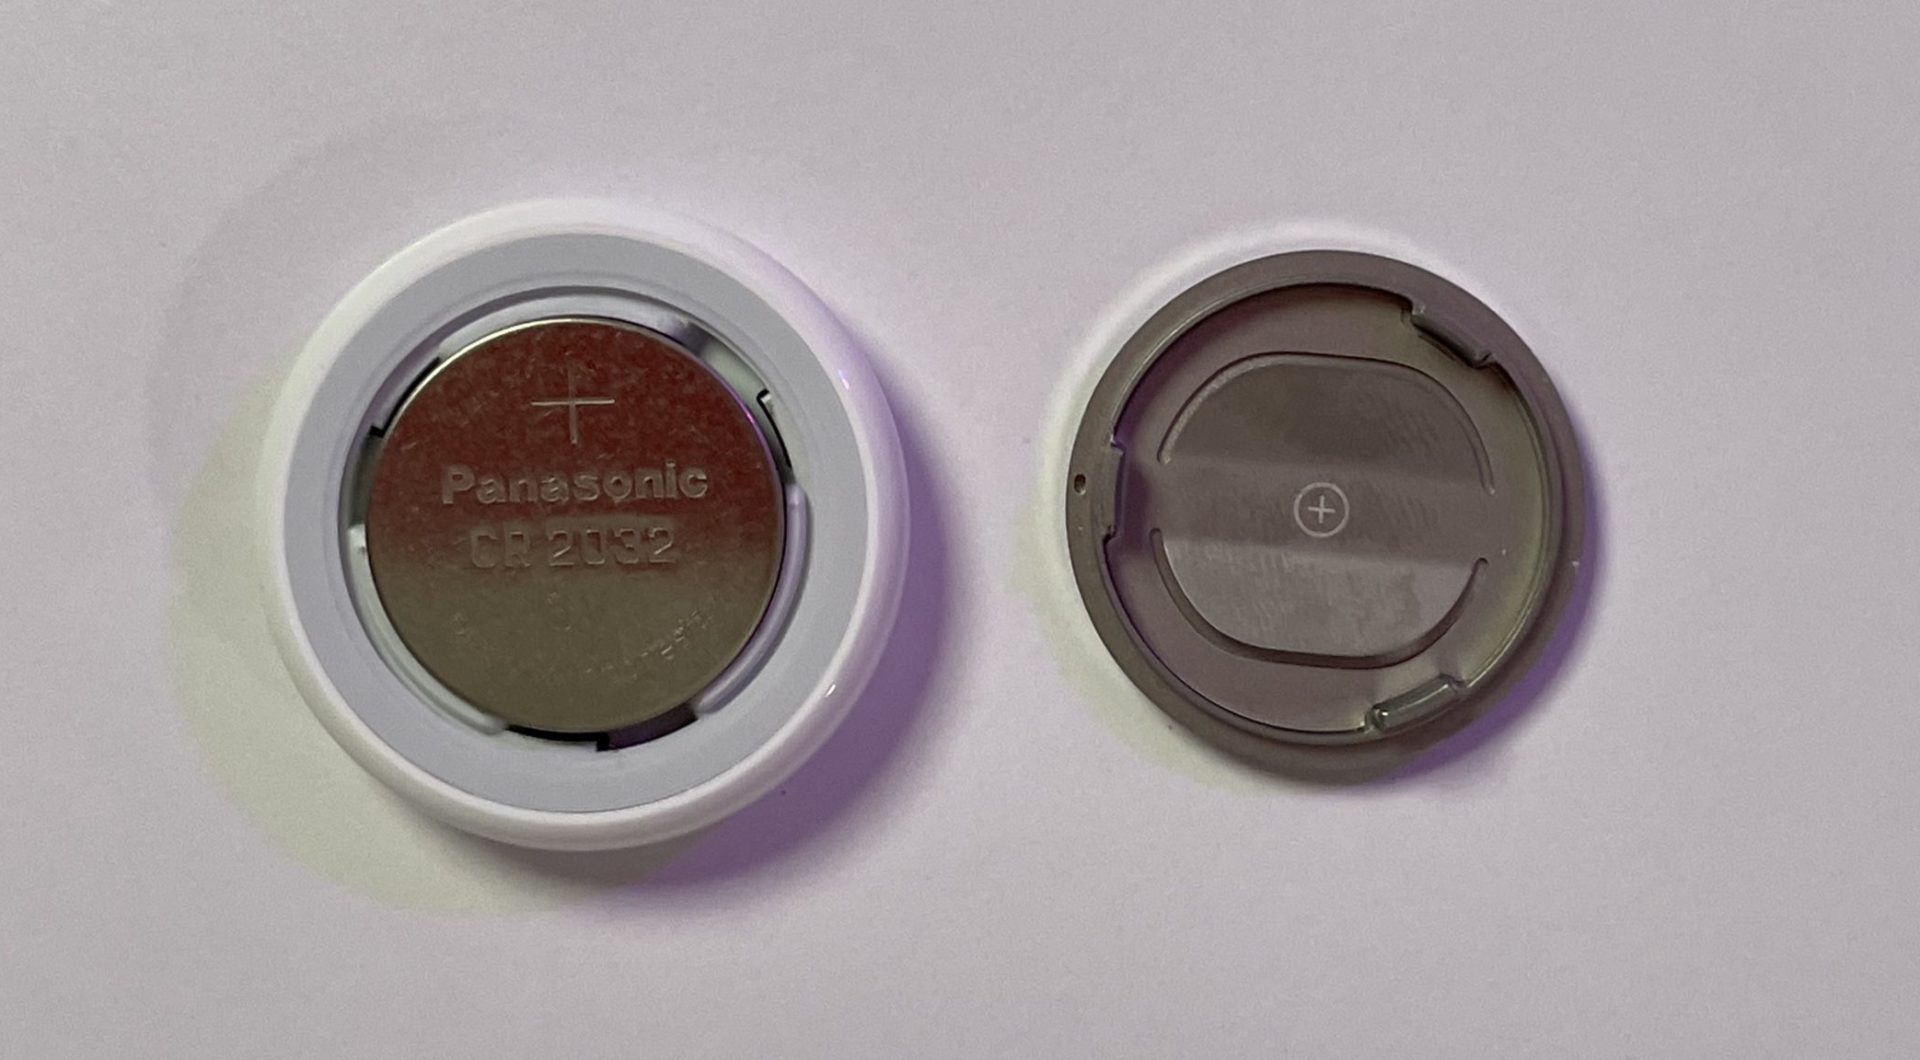 panasonic battery in airtags